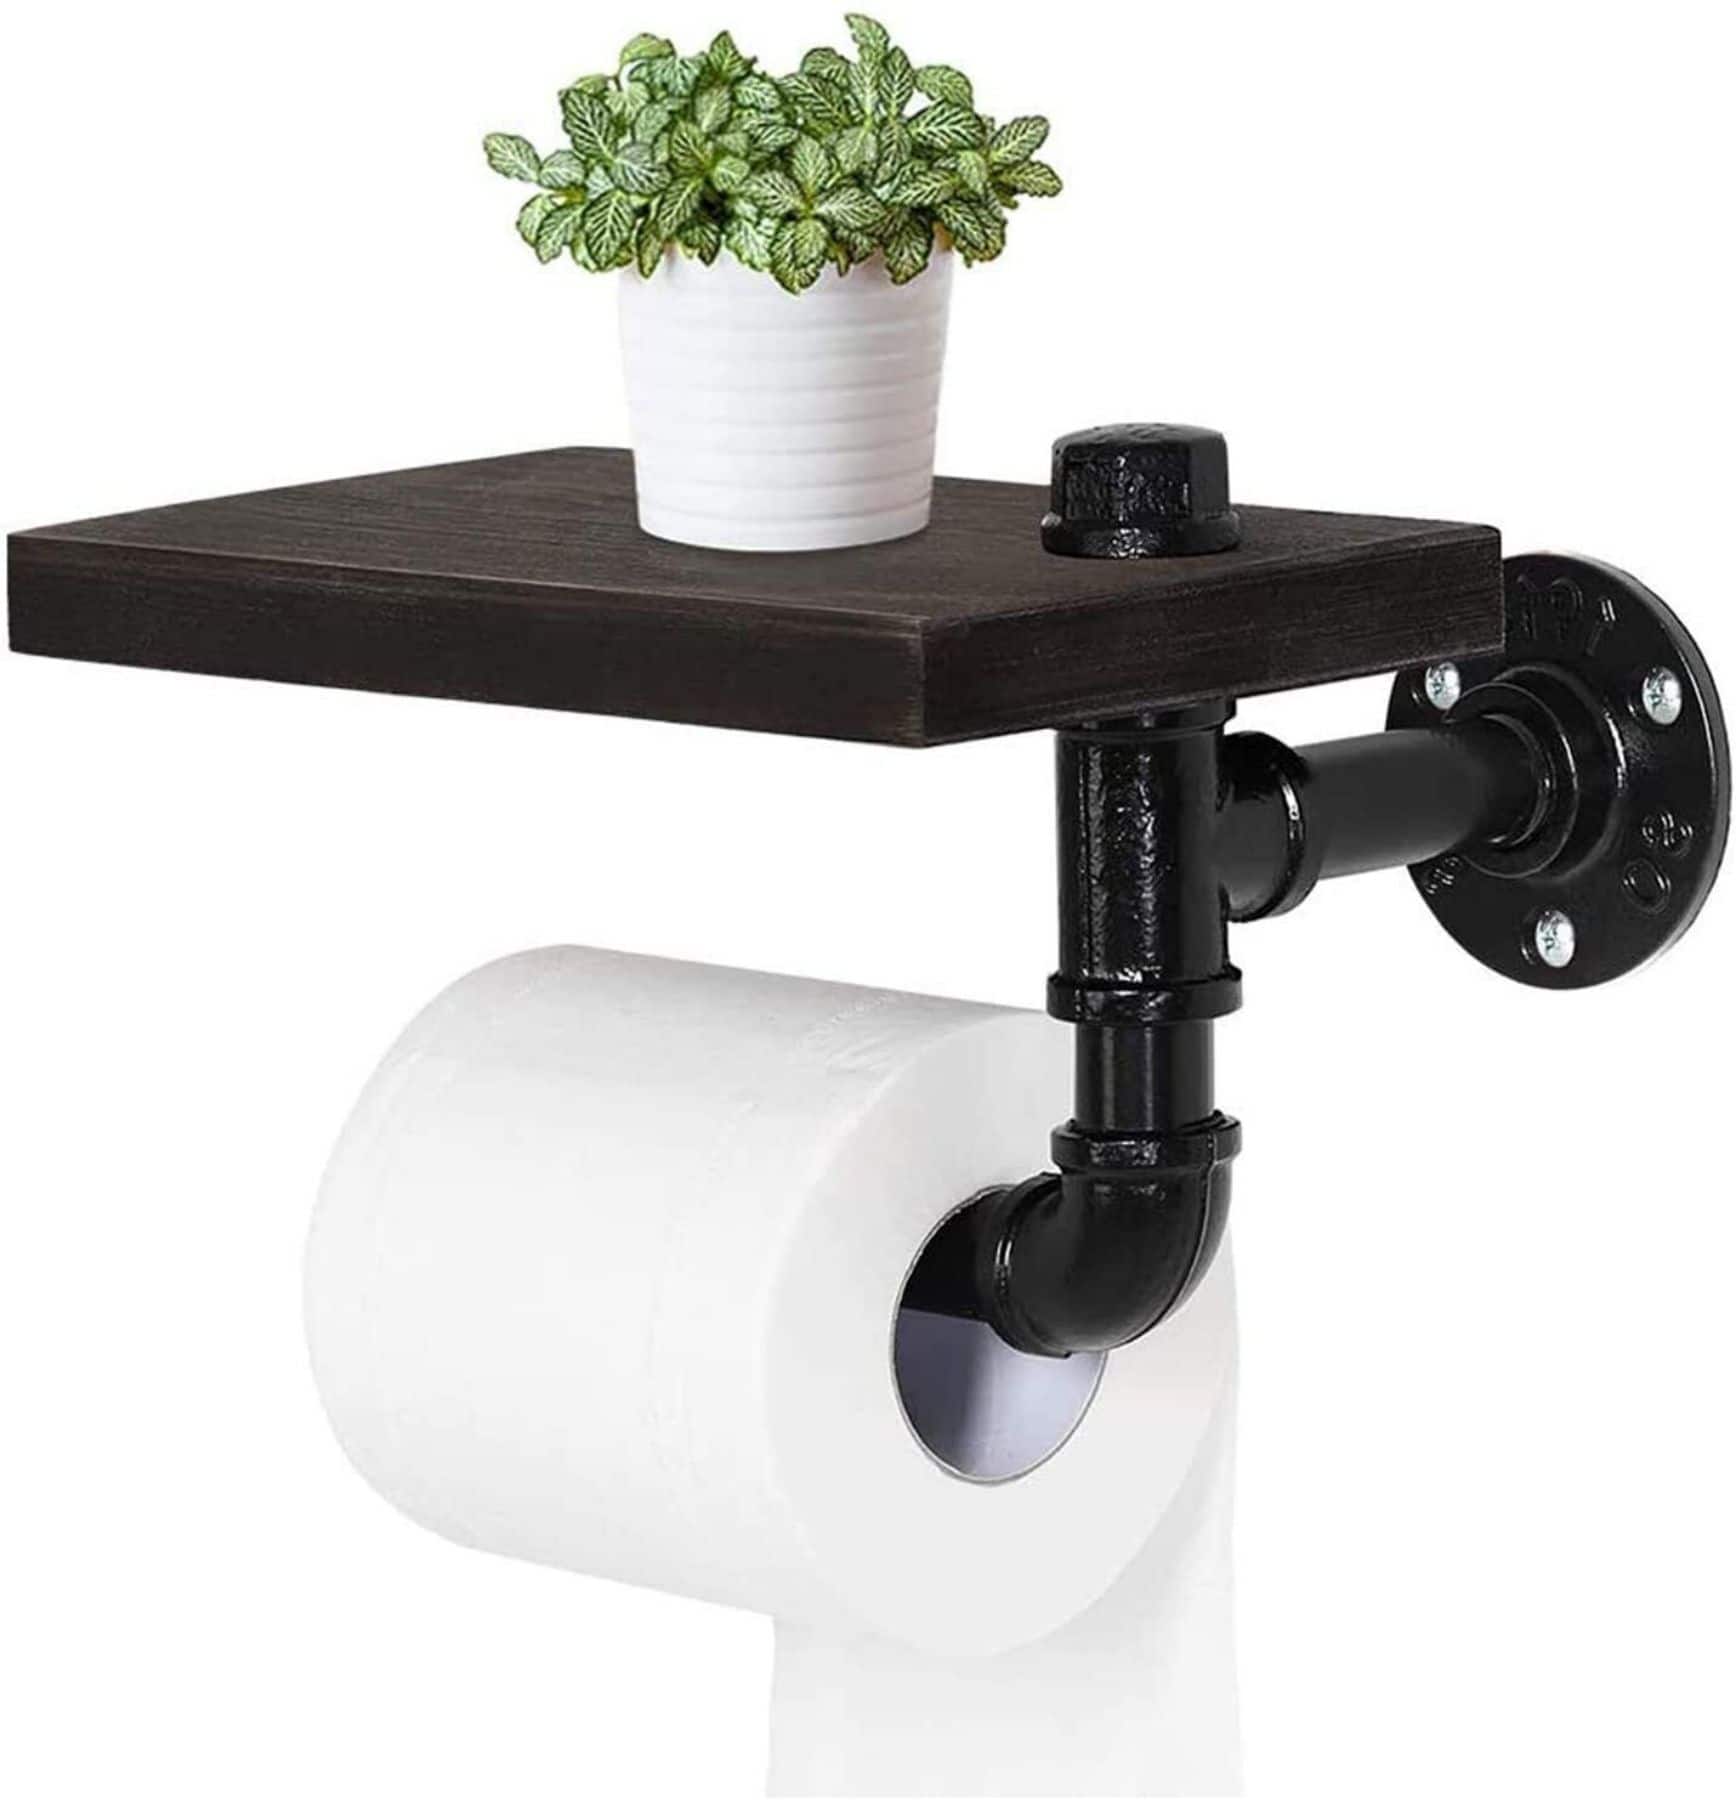 Rustic Brown Wood Toilet Paper Holder Wall Mount with Shelf by NEX | 4.1 x 7.7 x 8.7 | Michaels D722935S